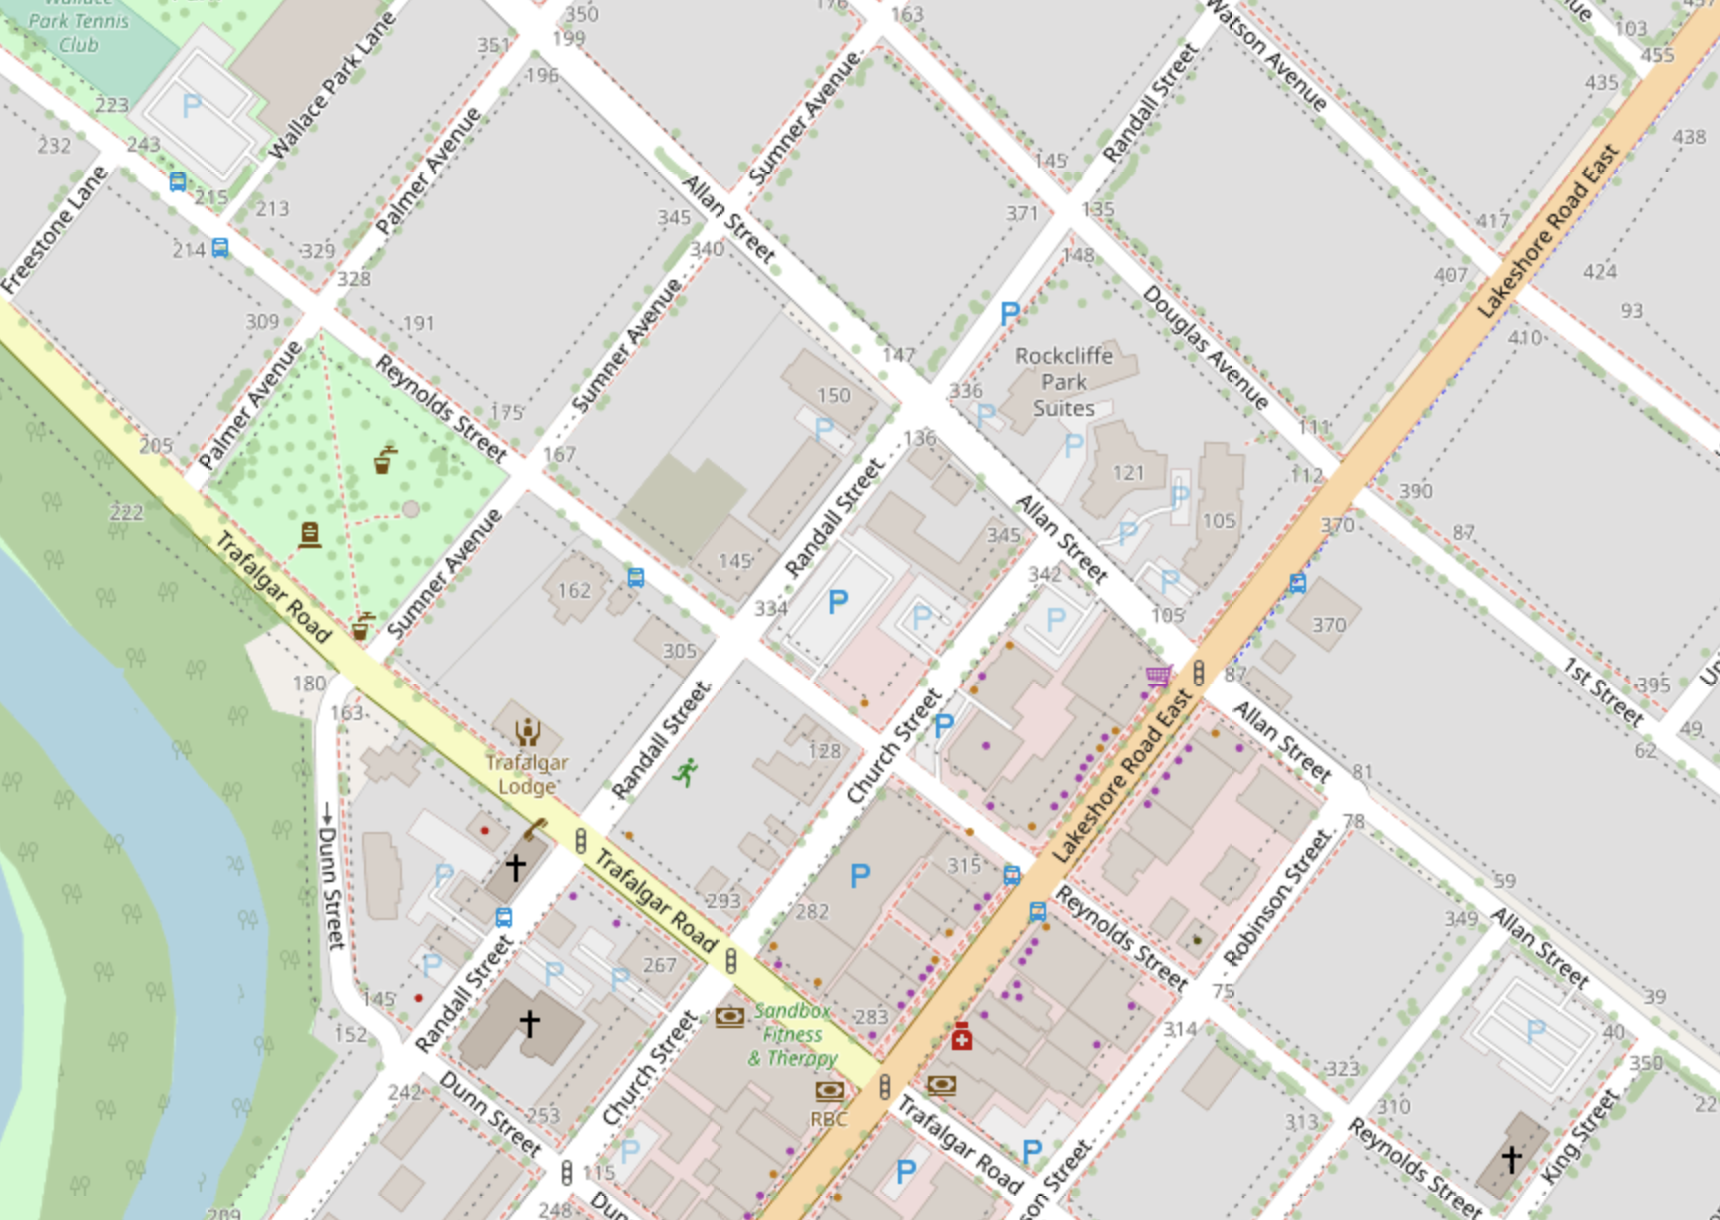 Reynolds St and Randall St | Openstreetmap